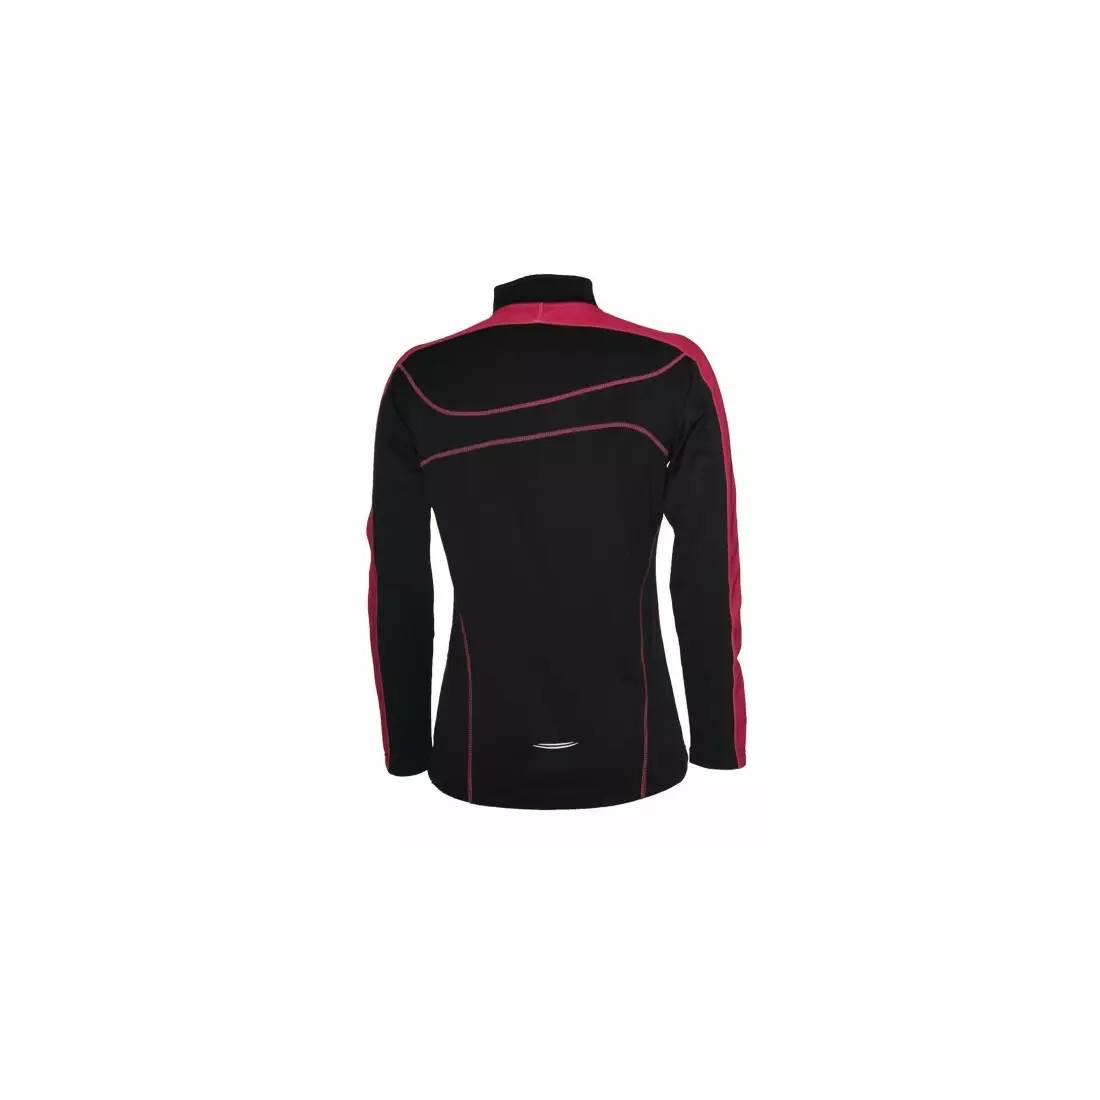 ROGELLI RUN MELS - women's insulated running sweatshirt - color: Black and pink